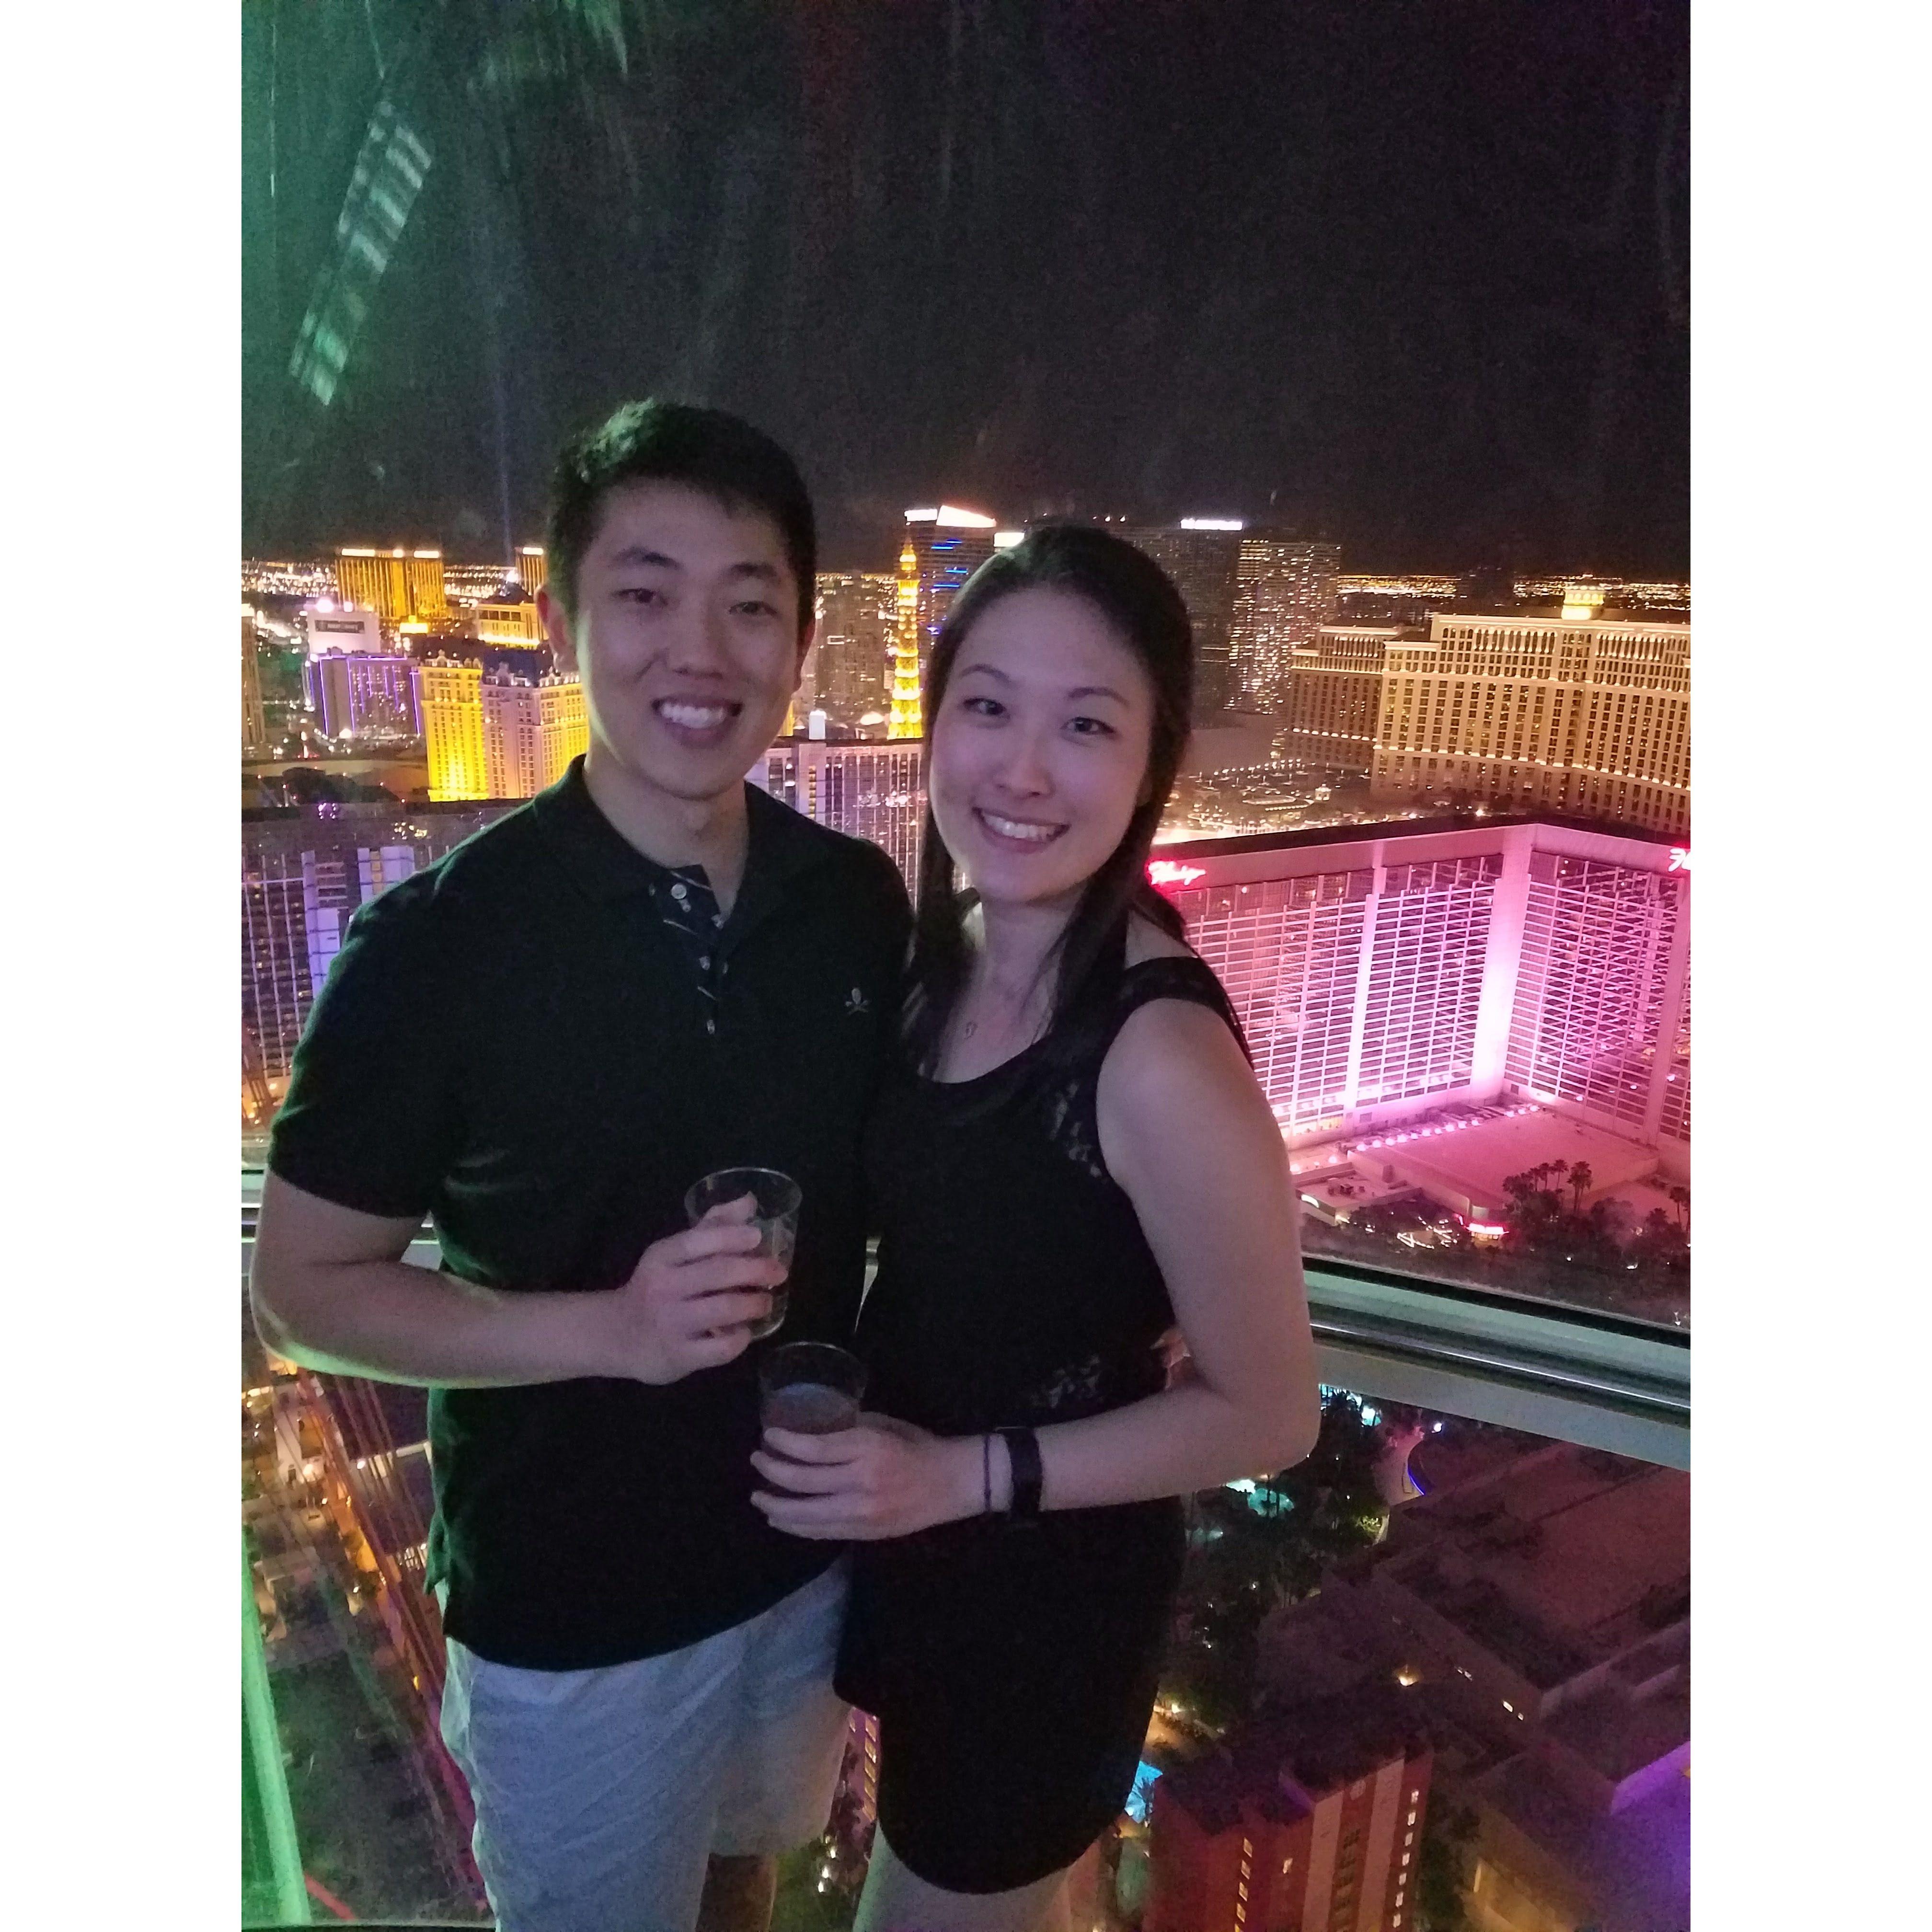 Jun 2017: Our very first vacation together as a couple - obviously stopped by Vegas after visiting Kevin's family